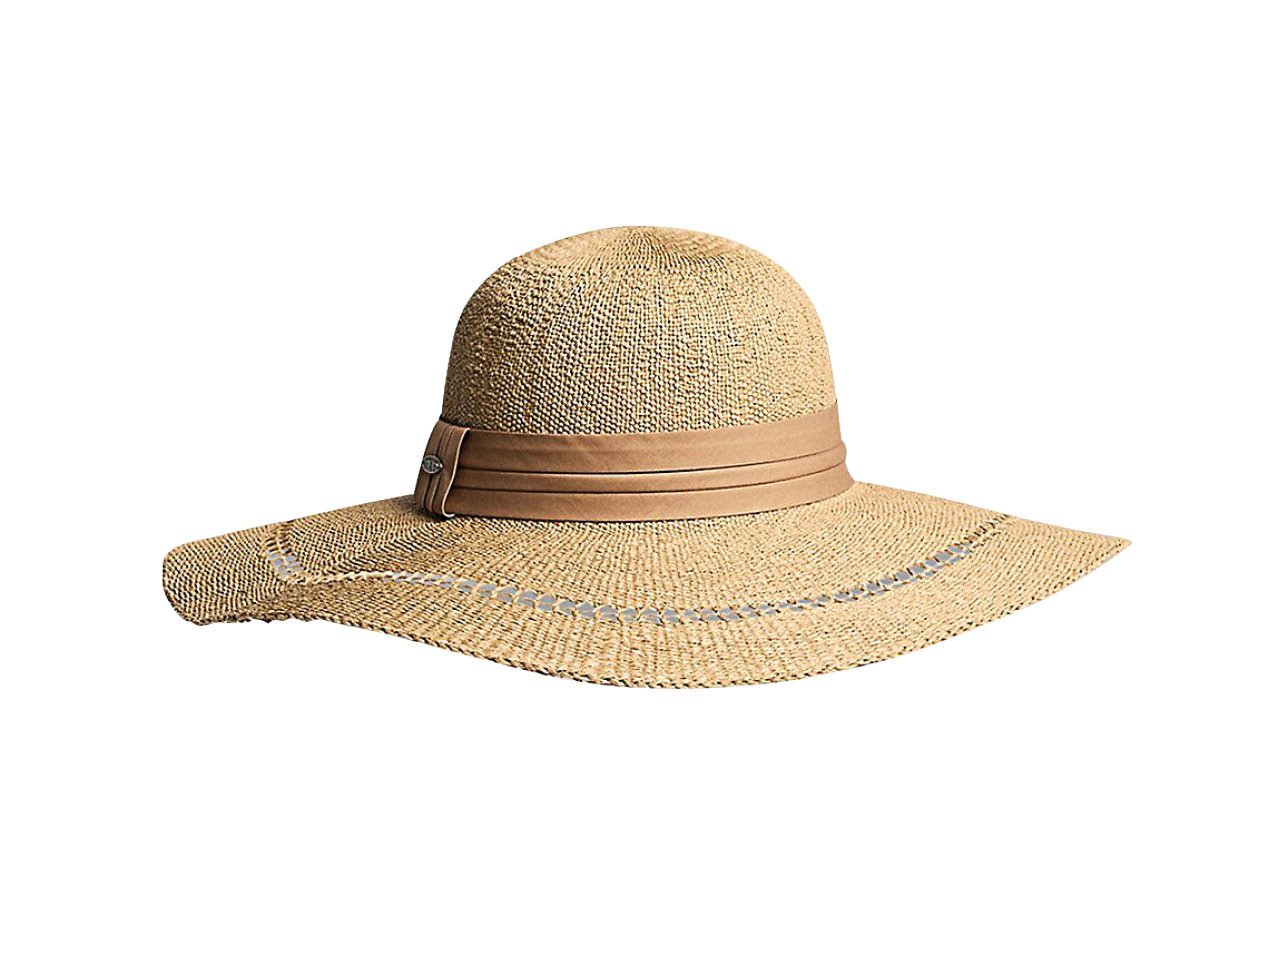 A Canadian hat straw hat that is perfect for summer outfits.